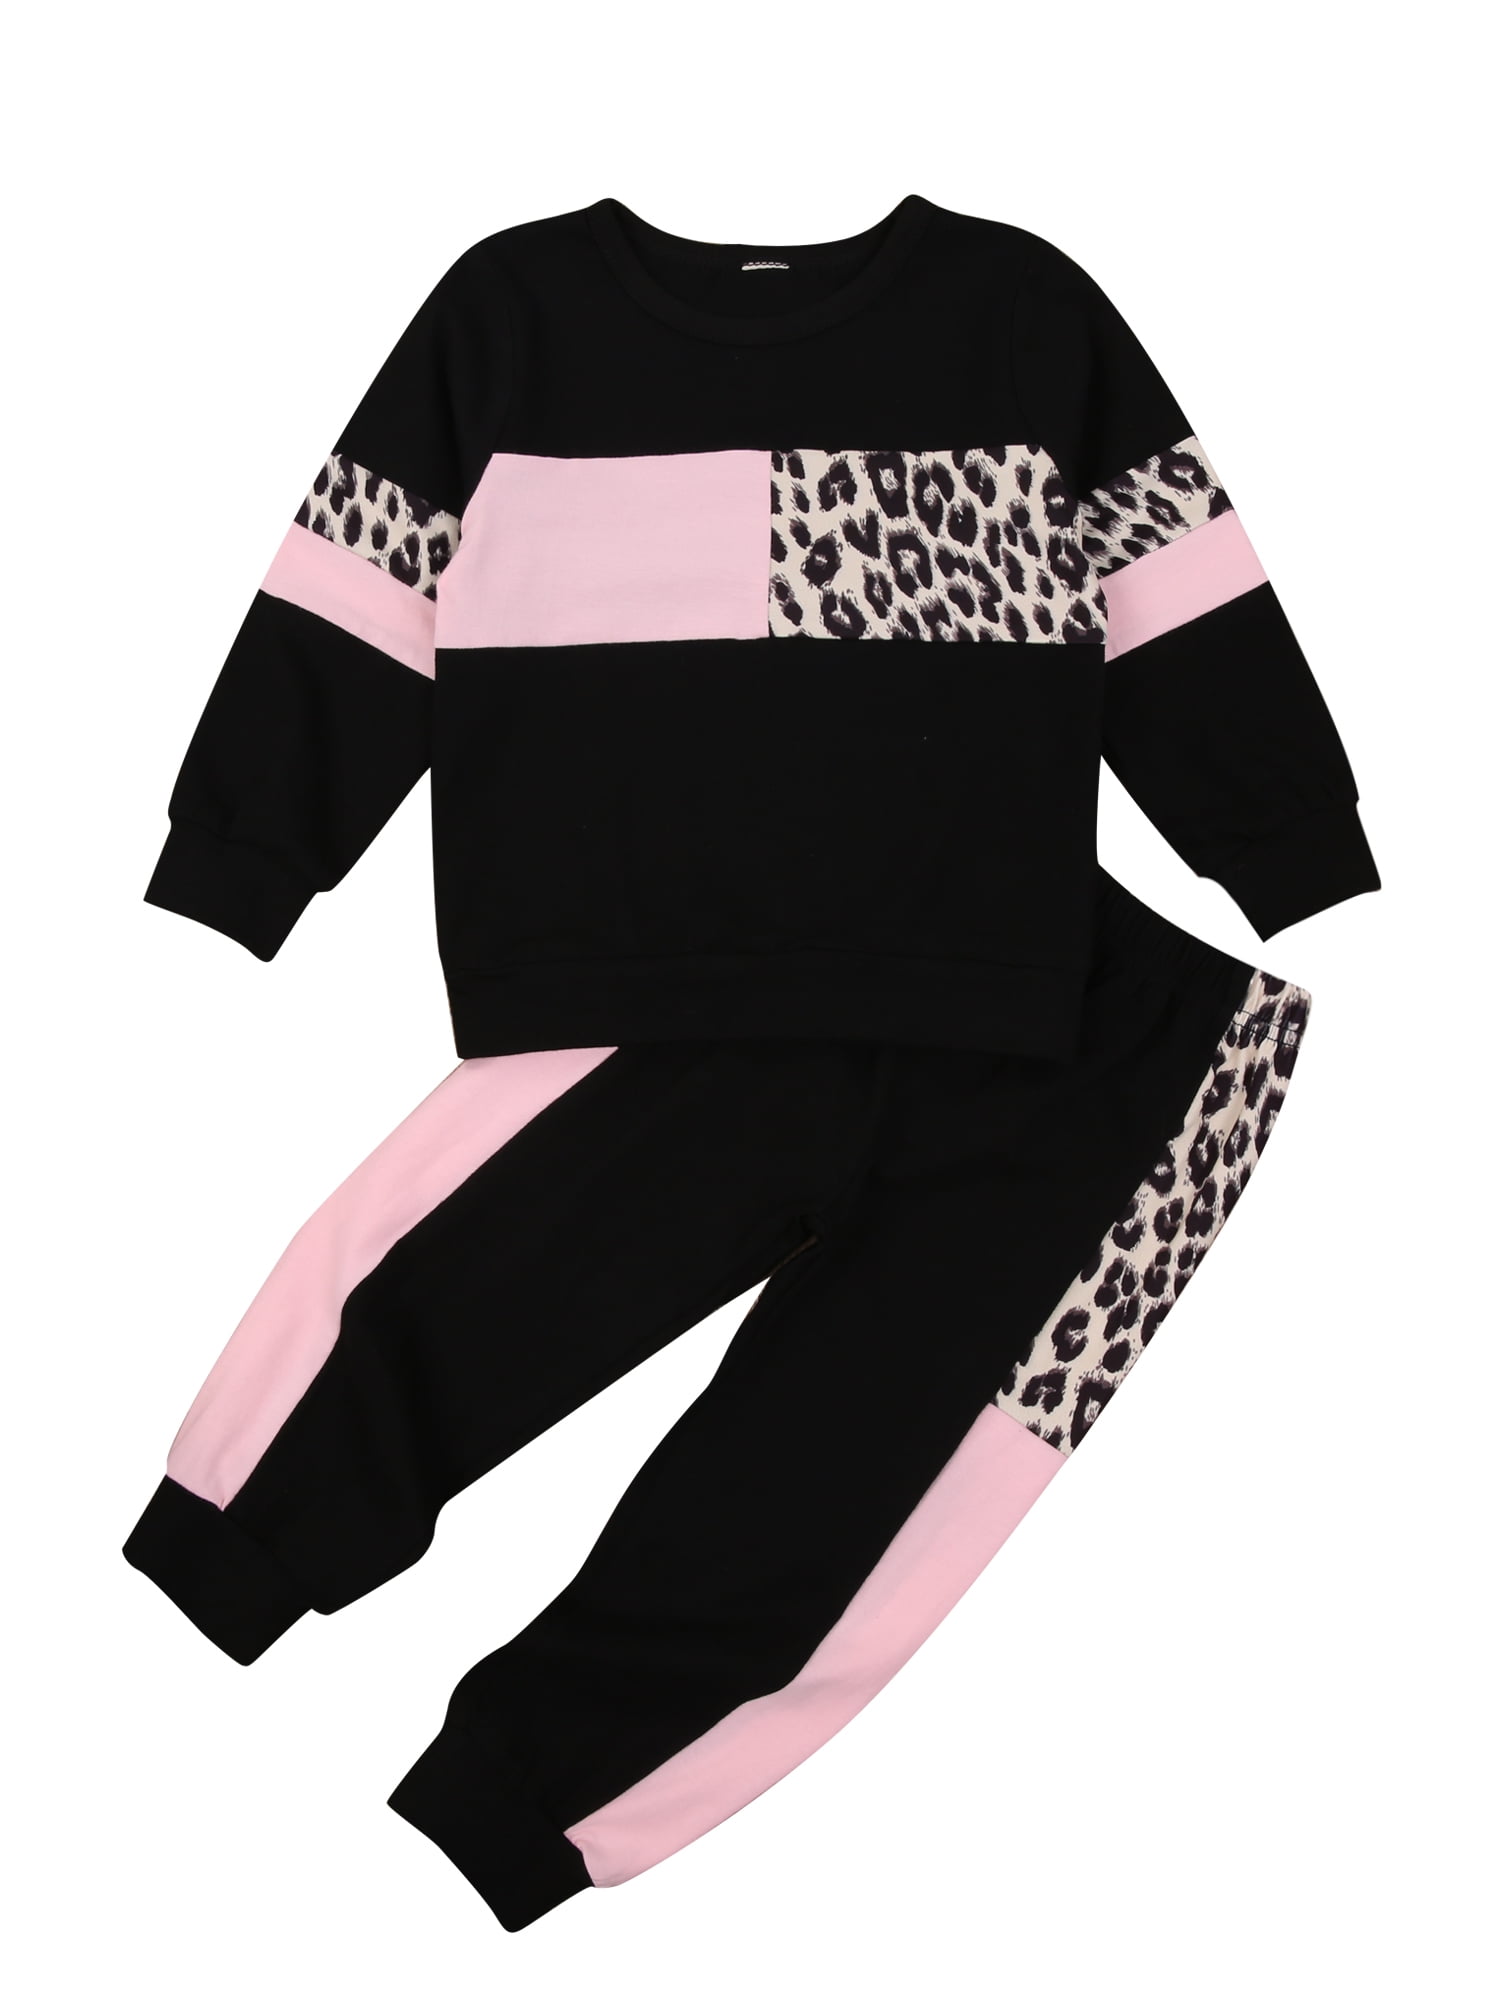 3T Toddler Girls Winter Fall Outfits Long Sleeve Shirts Sweatsuit Set Baby Girl Clothes 3 Months 